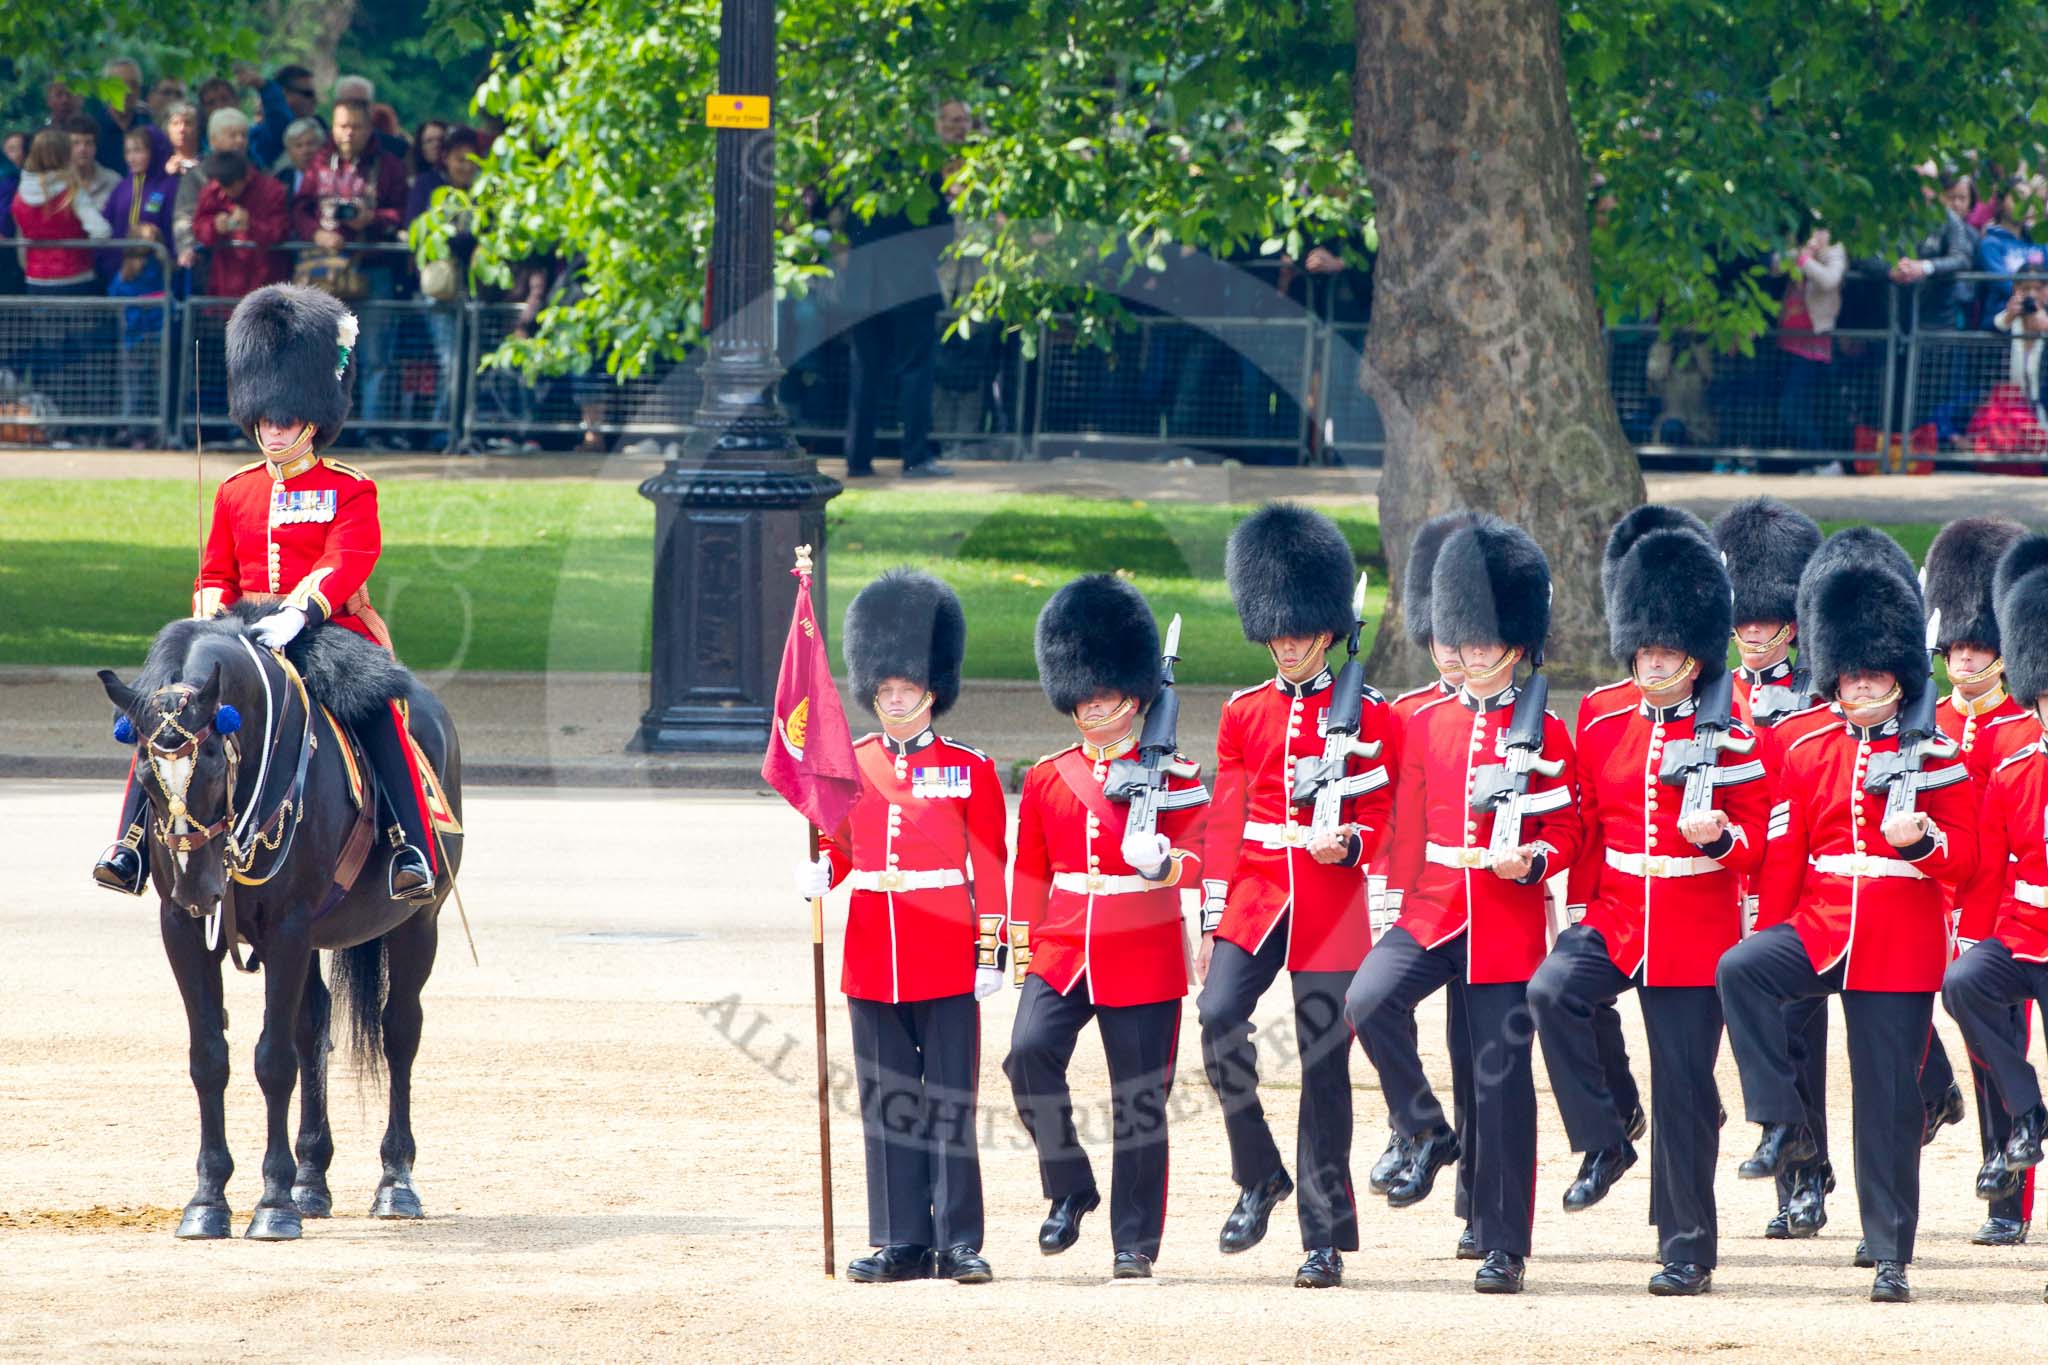 Trooping the Colour 2011: The Major of the Parade, Major Benedict Peter Norman Ramsay, Welsh Guards, on horseback, next to the  No. 1 Guard. the Escort to the Colour..
Horse Guards Parade, Westminster,
London SW1,
Greater London,
United Kingdom,
on 11 June 2011 at 11:51, image #307